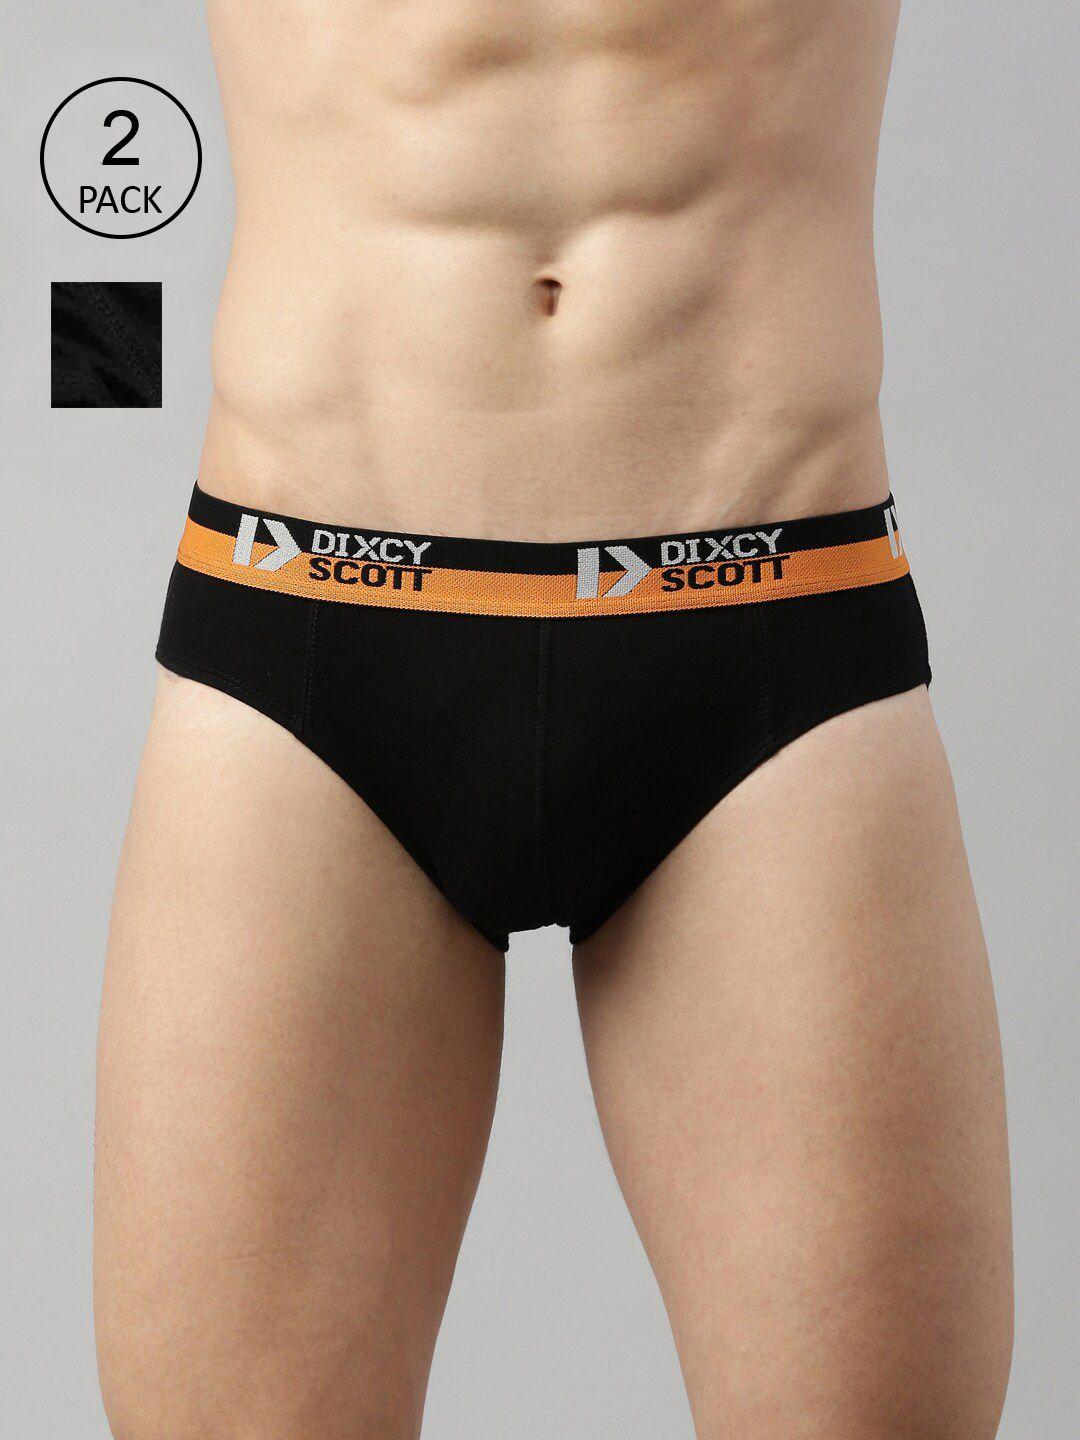 dixcy-scott-men-pack-of-solid-pure-cotton-mid-rise-basic-briefs